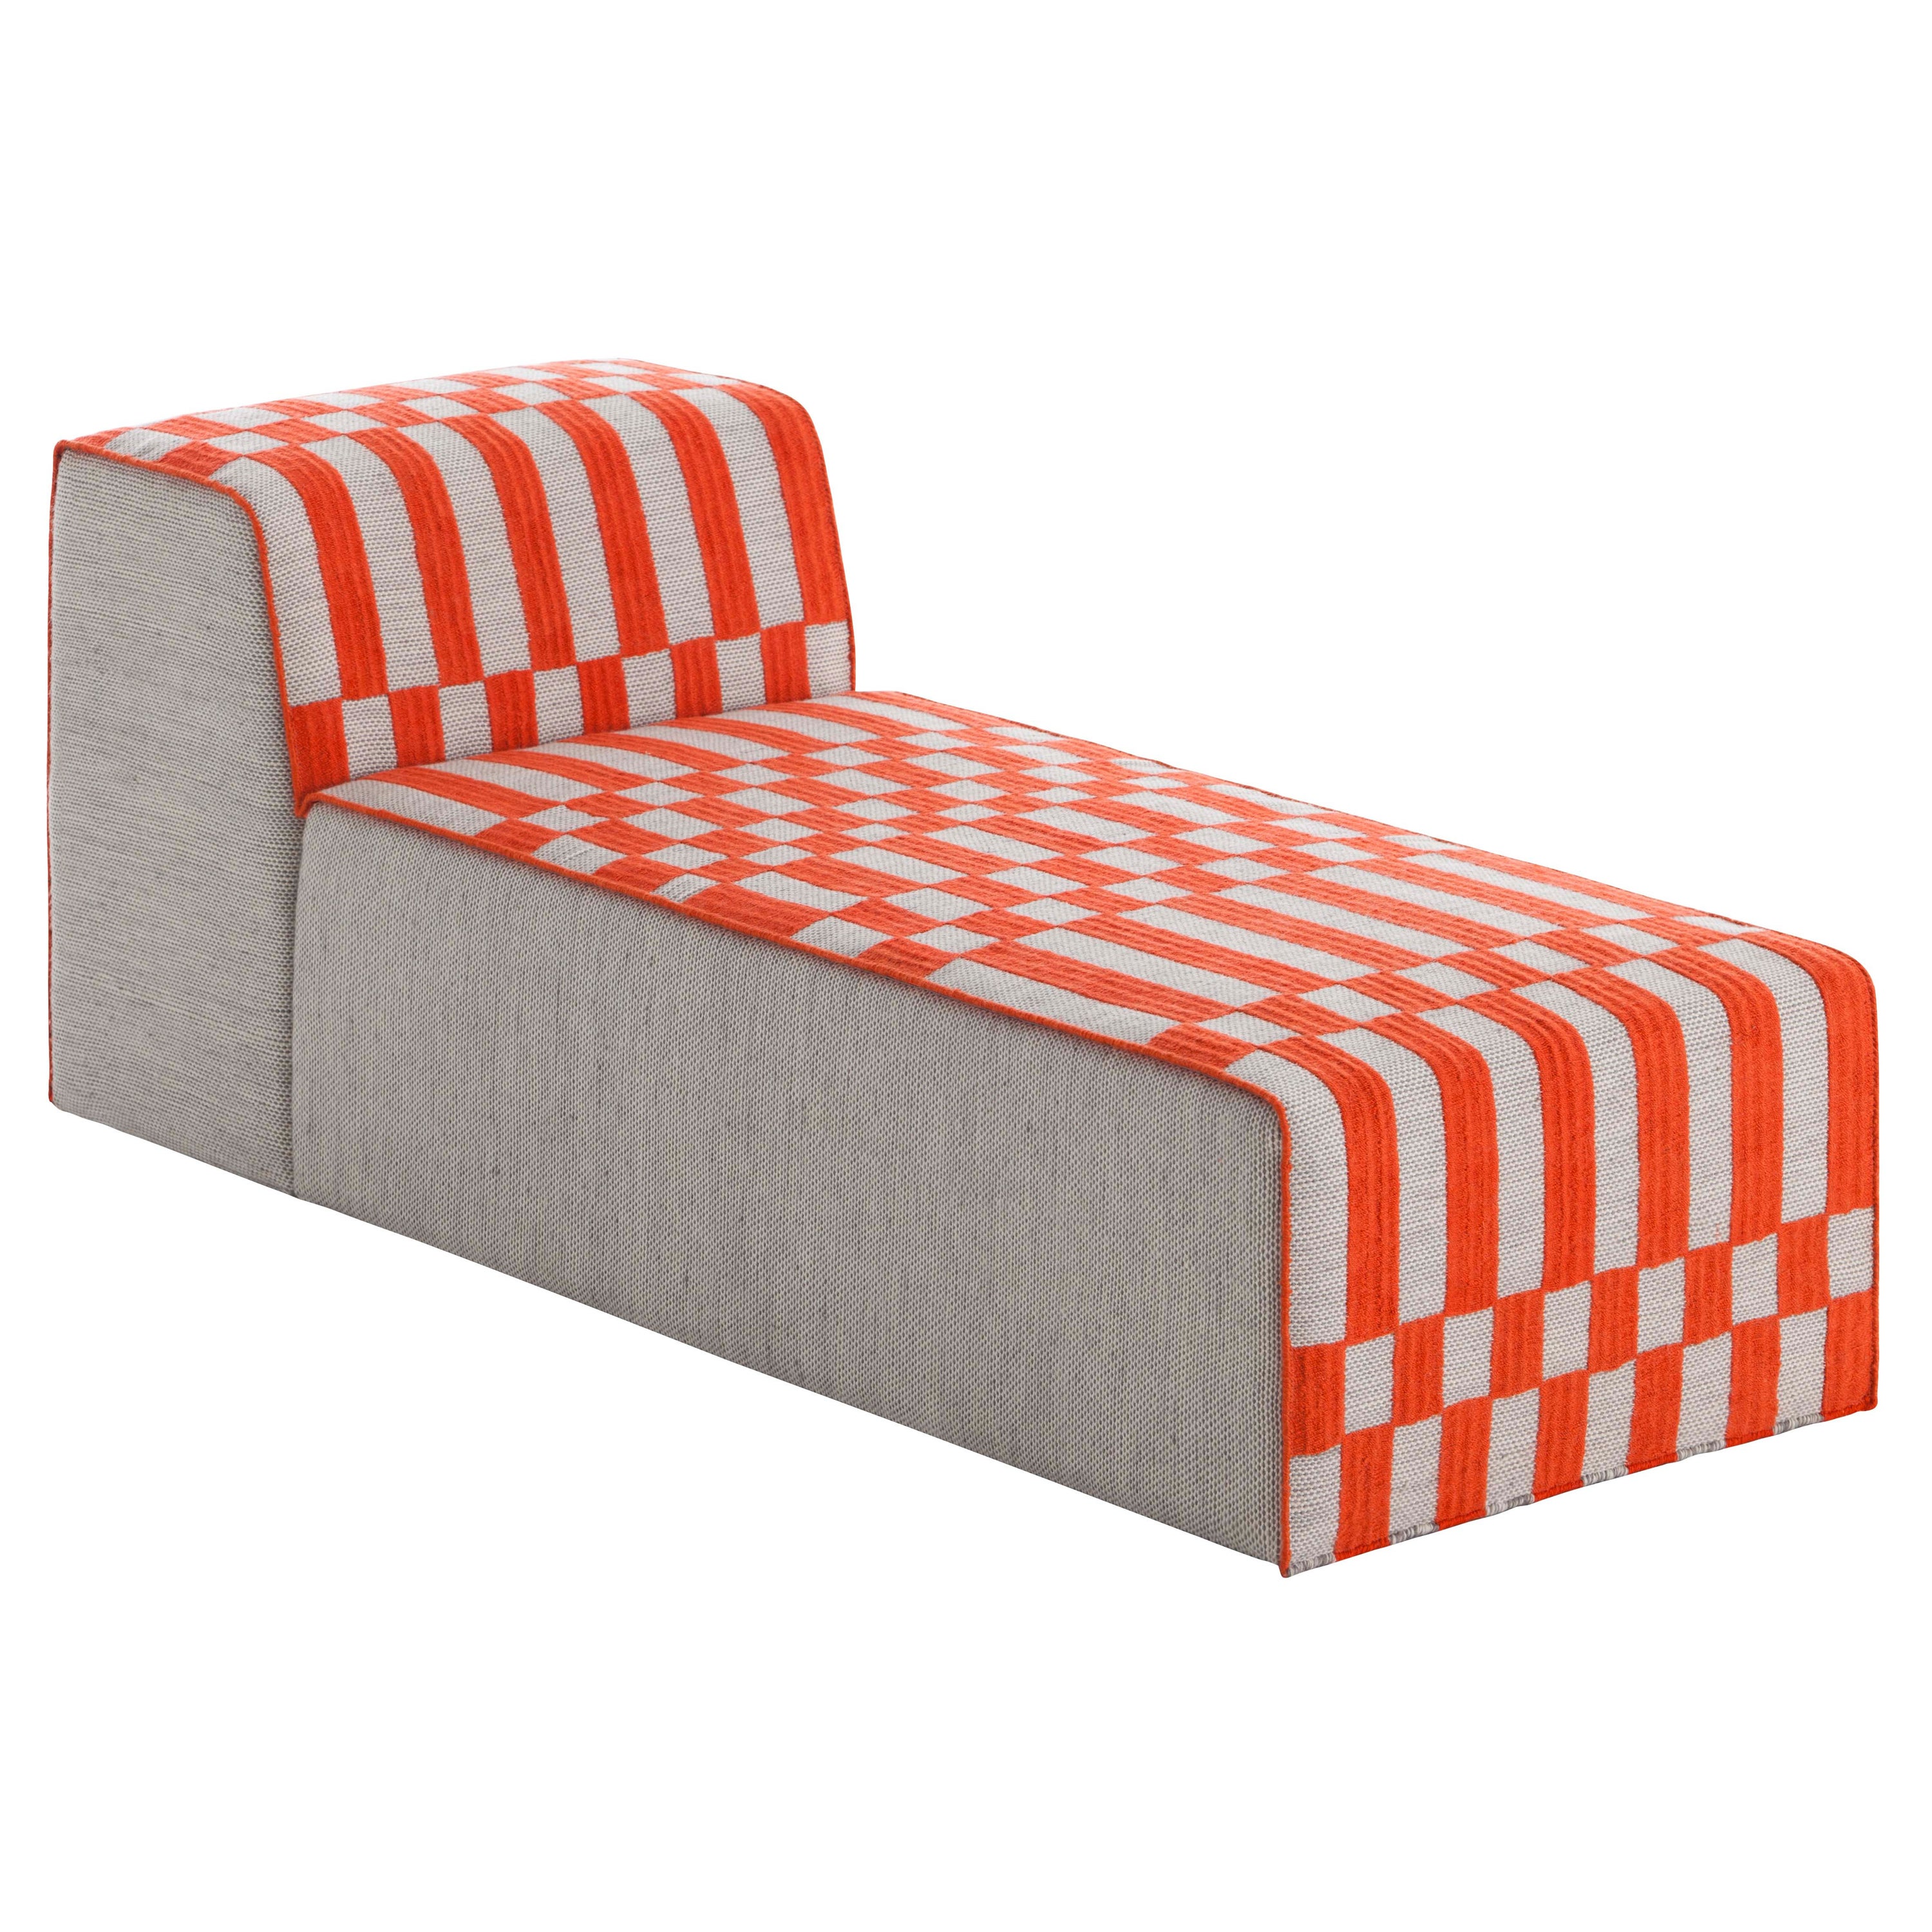 GAN Spaces Bandas Chaise Longue in B Orange with Wood Frame by Patricia Urquiola For Sale